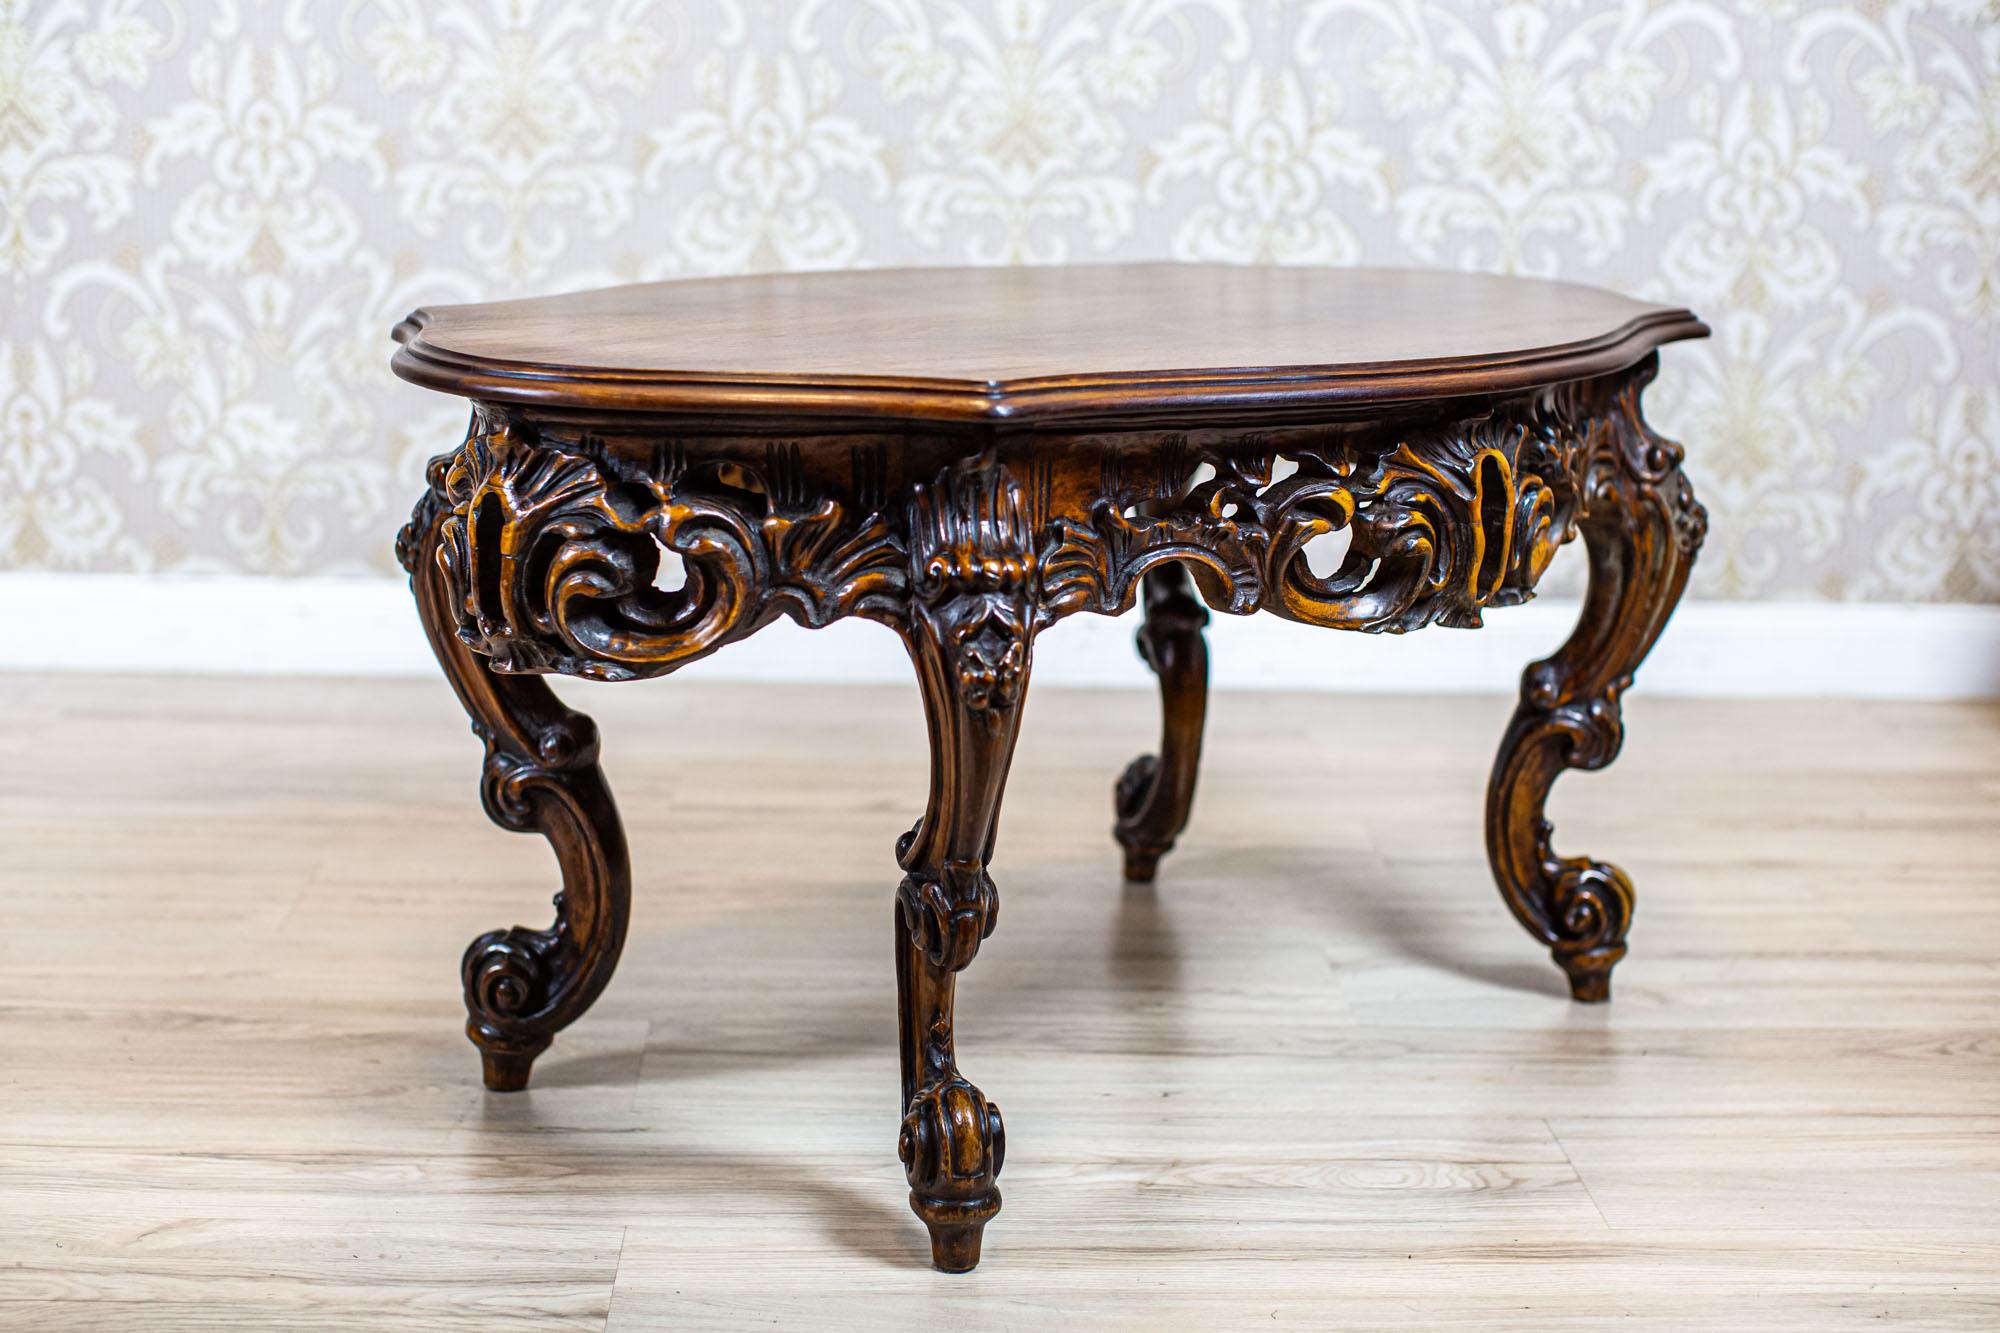 European Decorative Brown Coffee Table from the Mid 20th-Century with Carved Apron For Sale